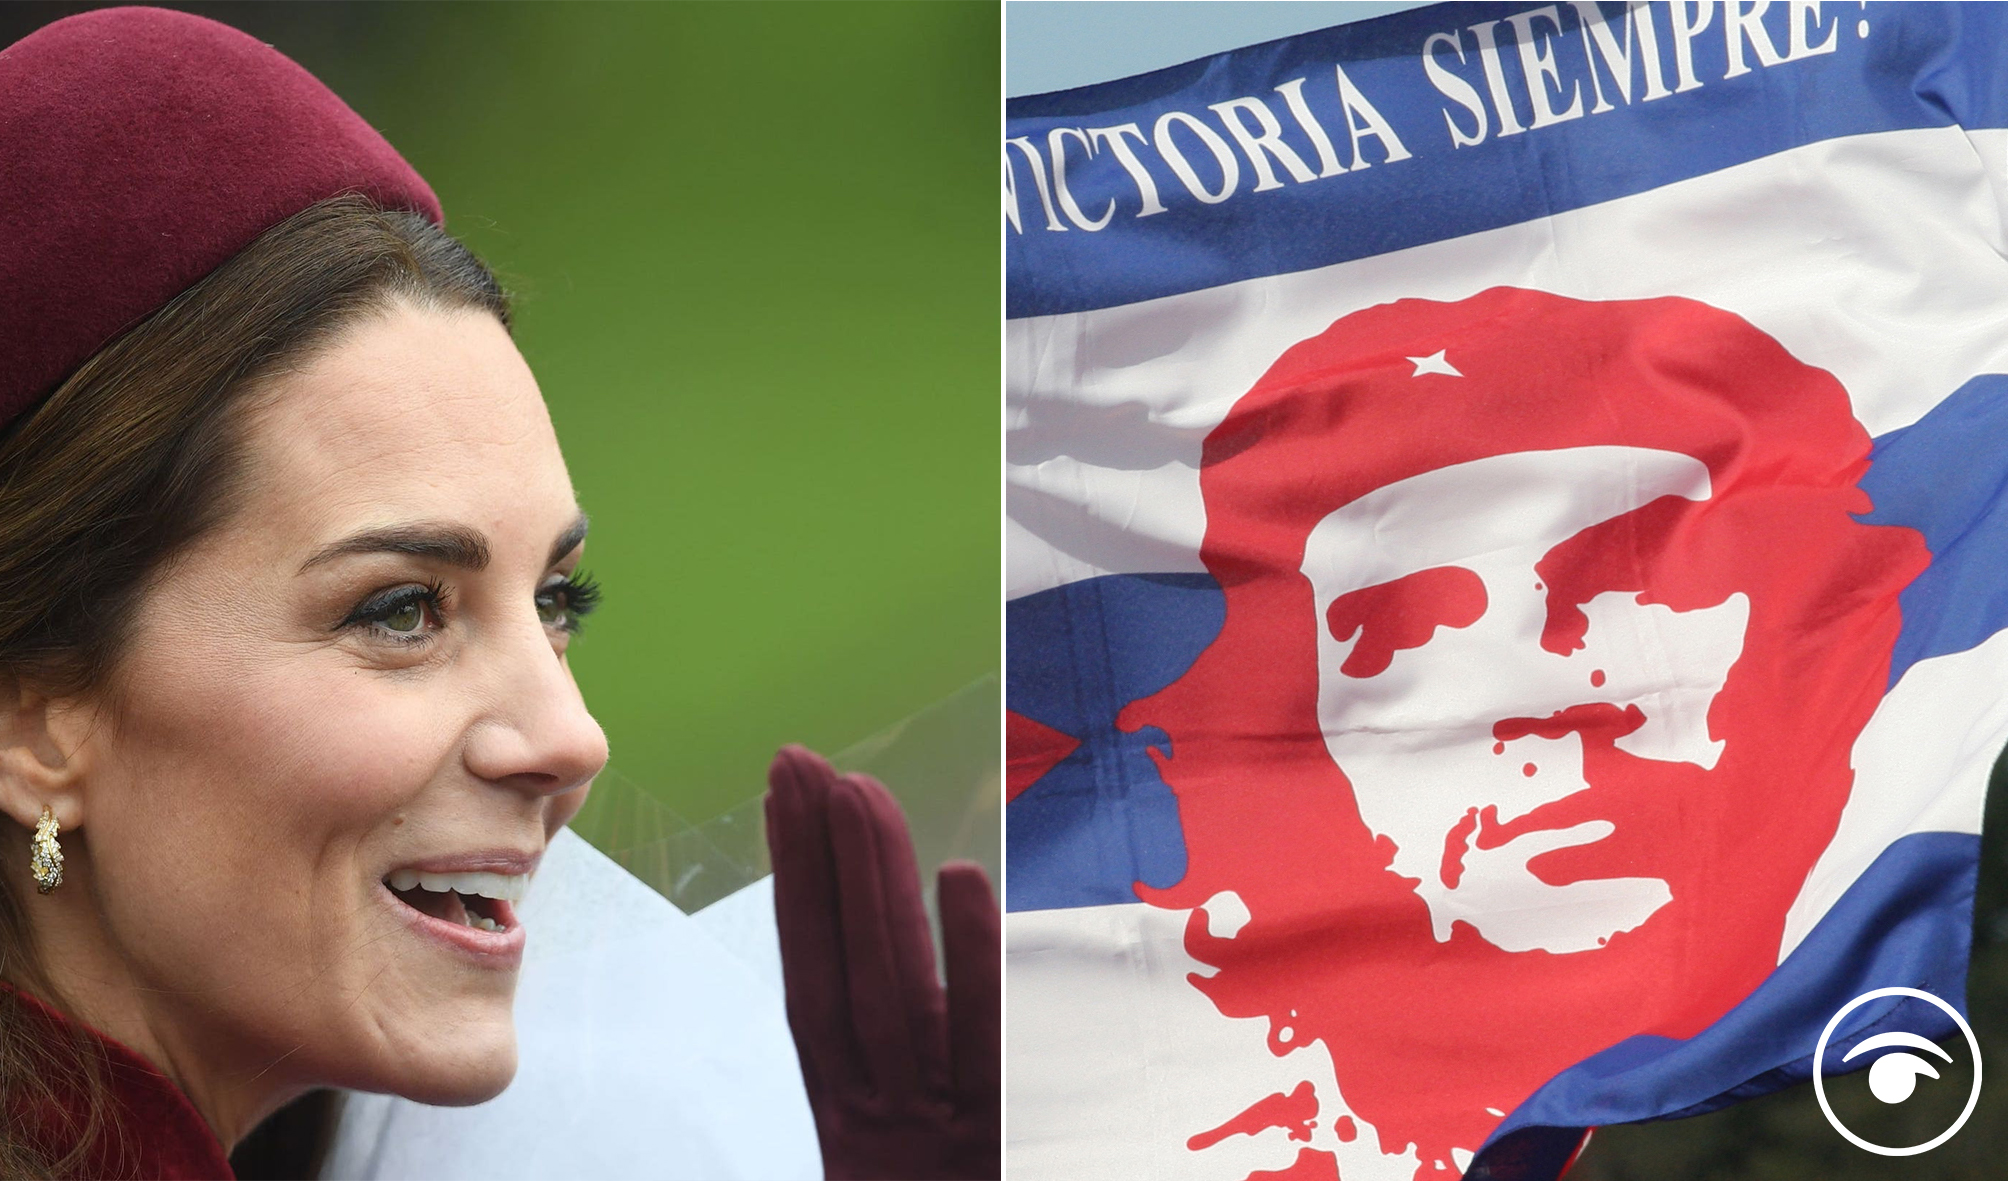 Astonished reactions as newspaper mocks up Kate Middleton as Che Guevara